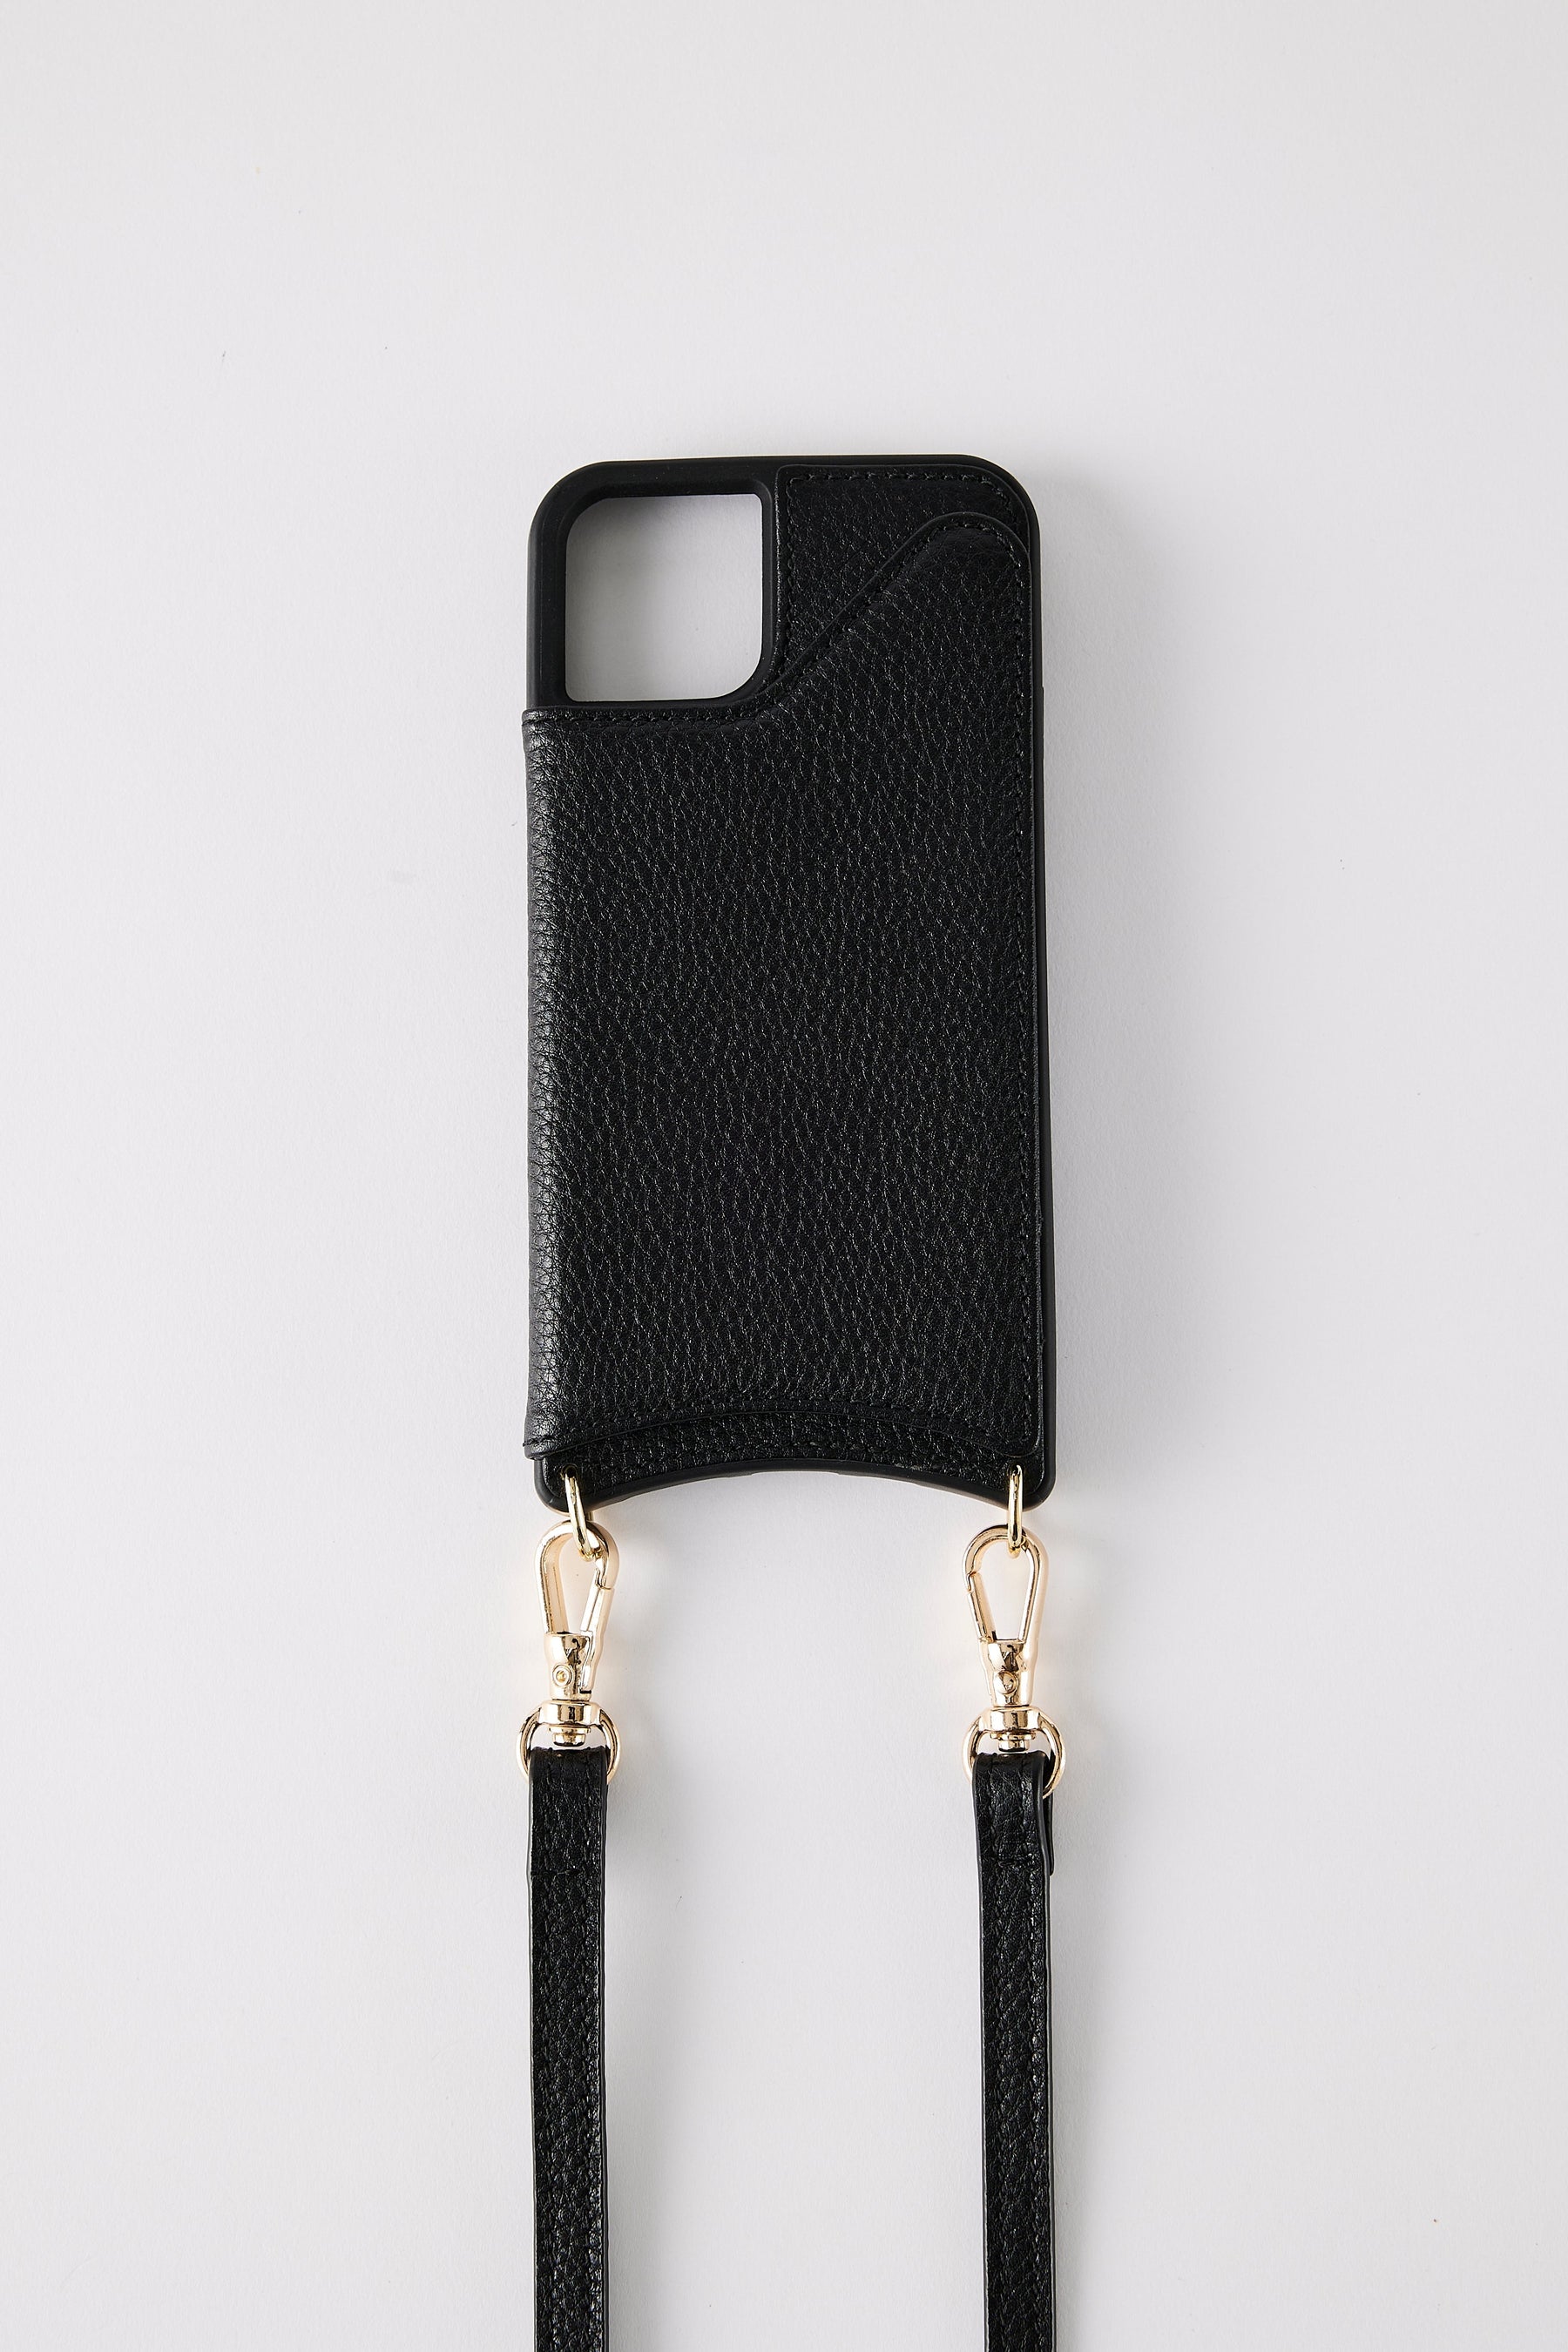 Genuine Leather Wallet Phone Case For IPhone 15 Pro Max 14 13 12 11  Crossbody Shoulder Strap, Luxury Design, Card Holder, Pocket Purse, Lanyard  Brand Name From Tmingying, $3.36 | DHgate.Com